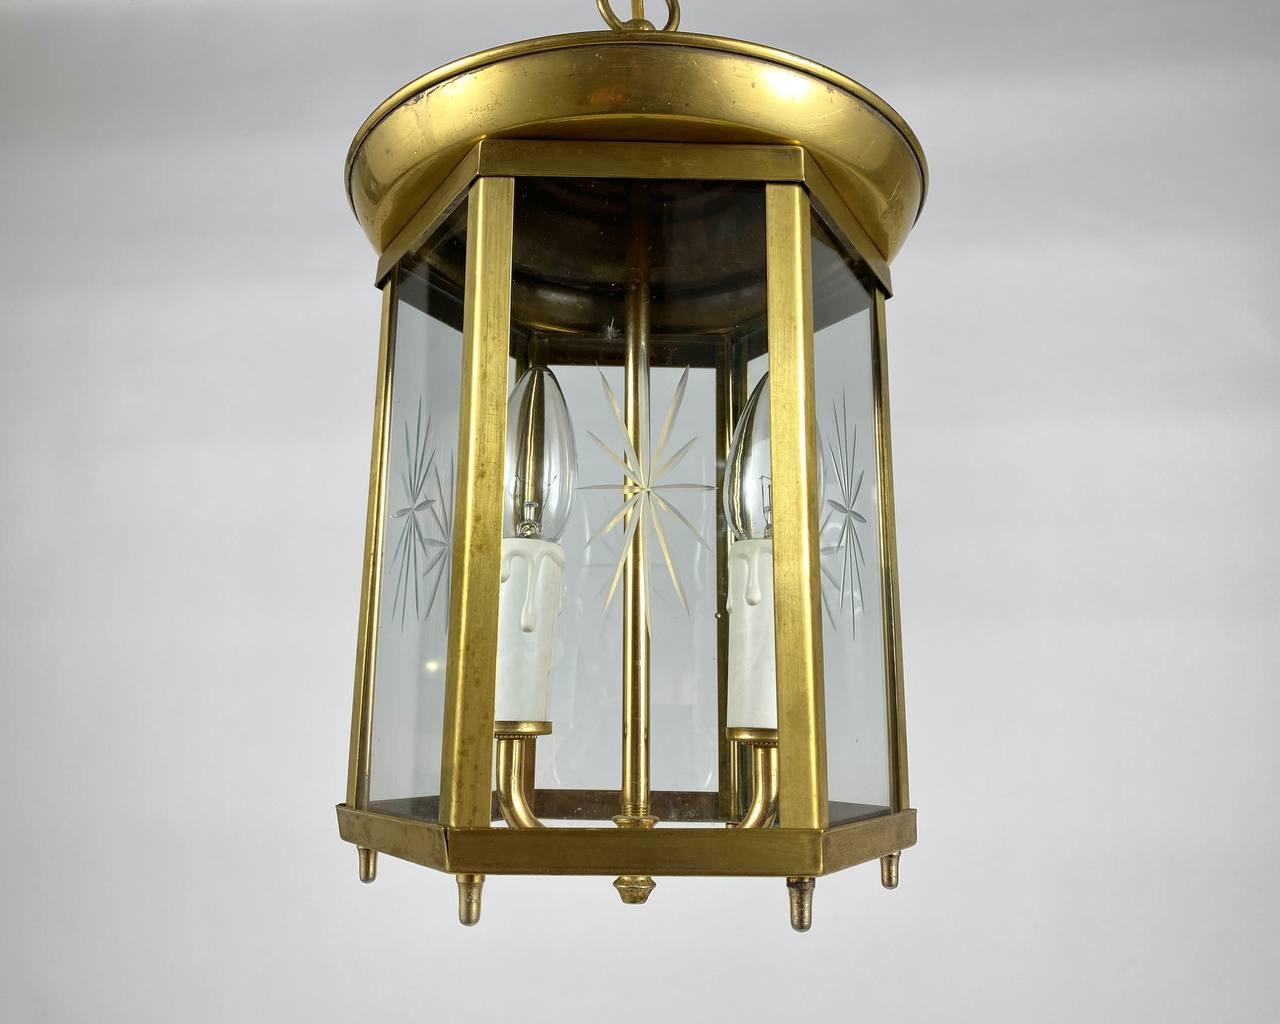 Vintage 2 Light Electric Lantern, 1980s, Brass and Beveled Glass In Excellent Condition For Sale In Bastogne, BE